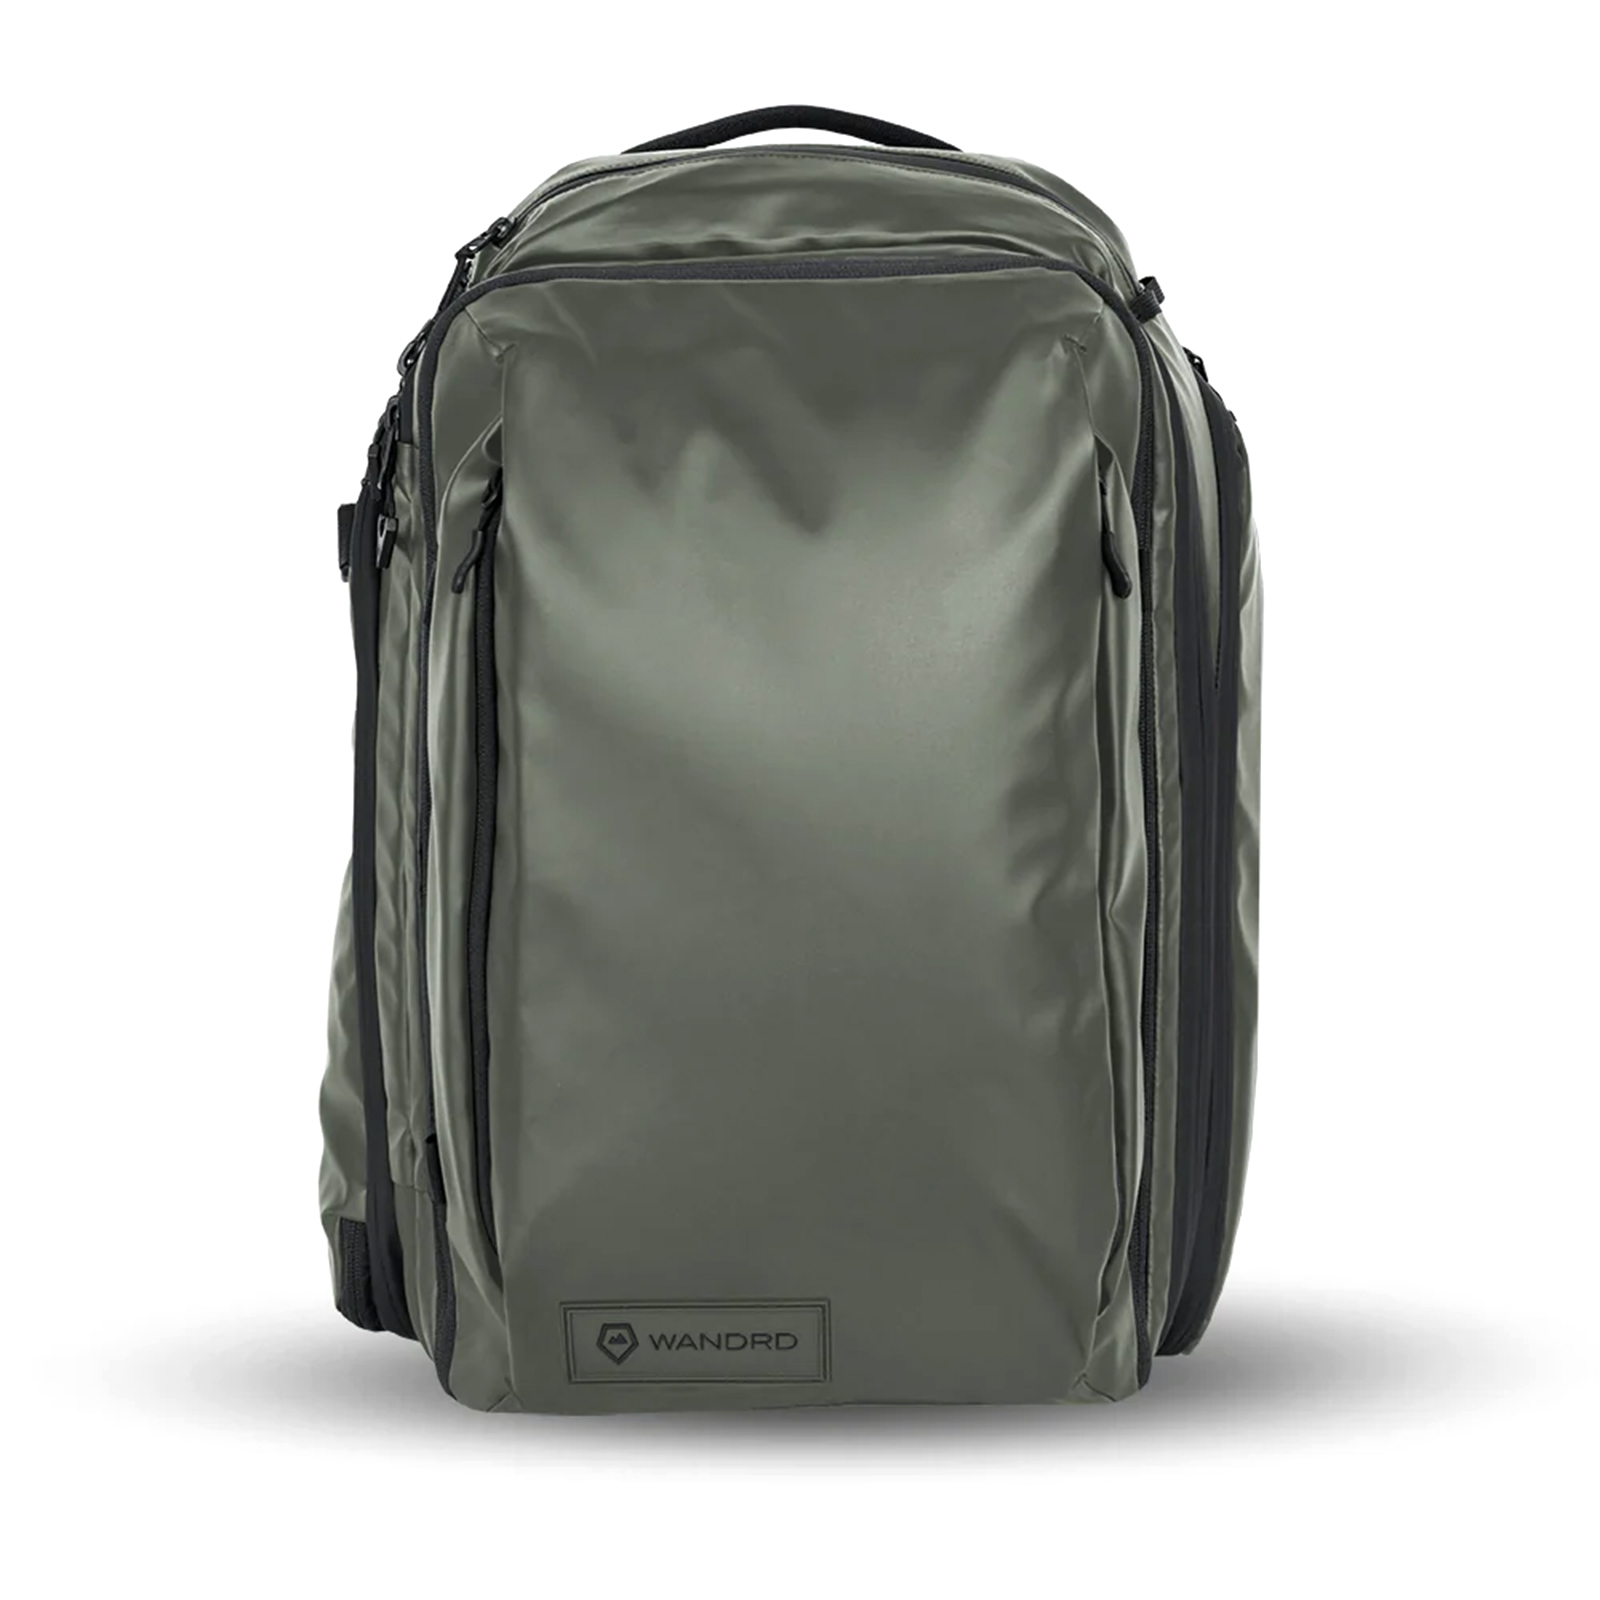 WANDRD Transit 35L Travel Backpack - Wasatch Green